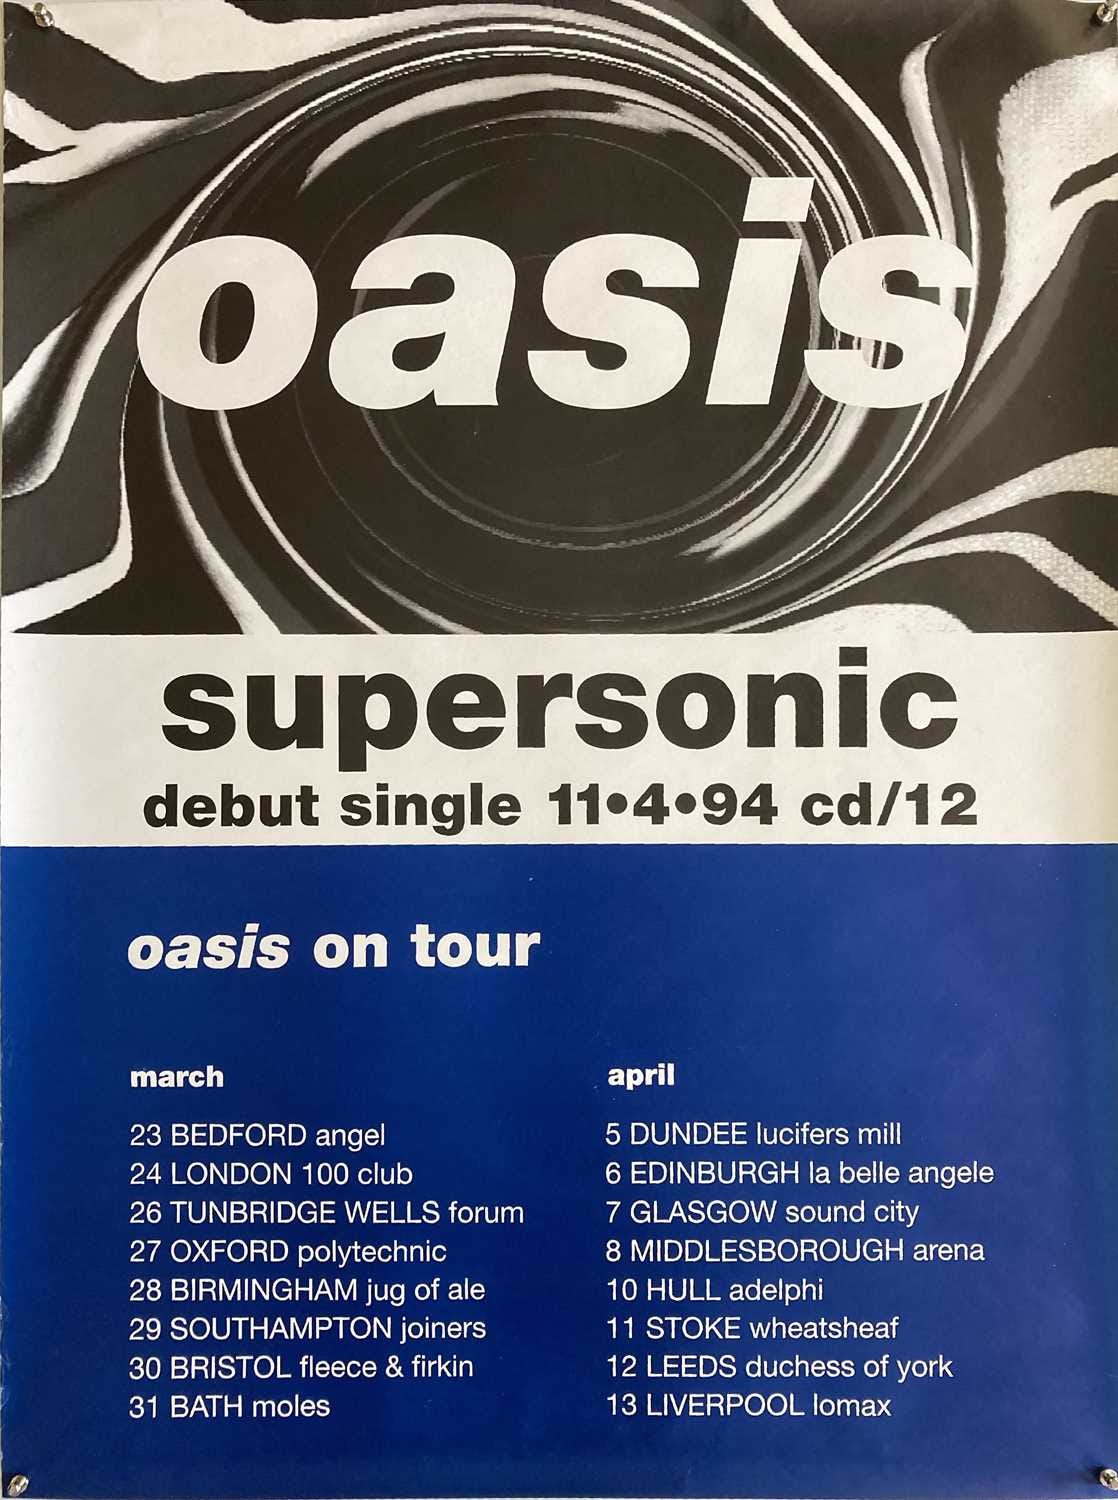 Lot 522 - OASIS 1994 SUPERSONIC / TOUR LISTINGS POSTER.